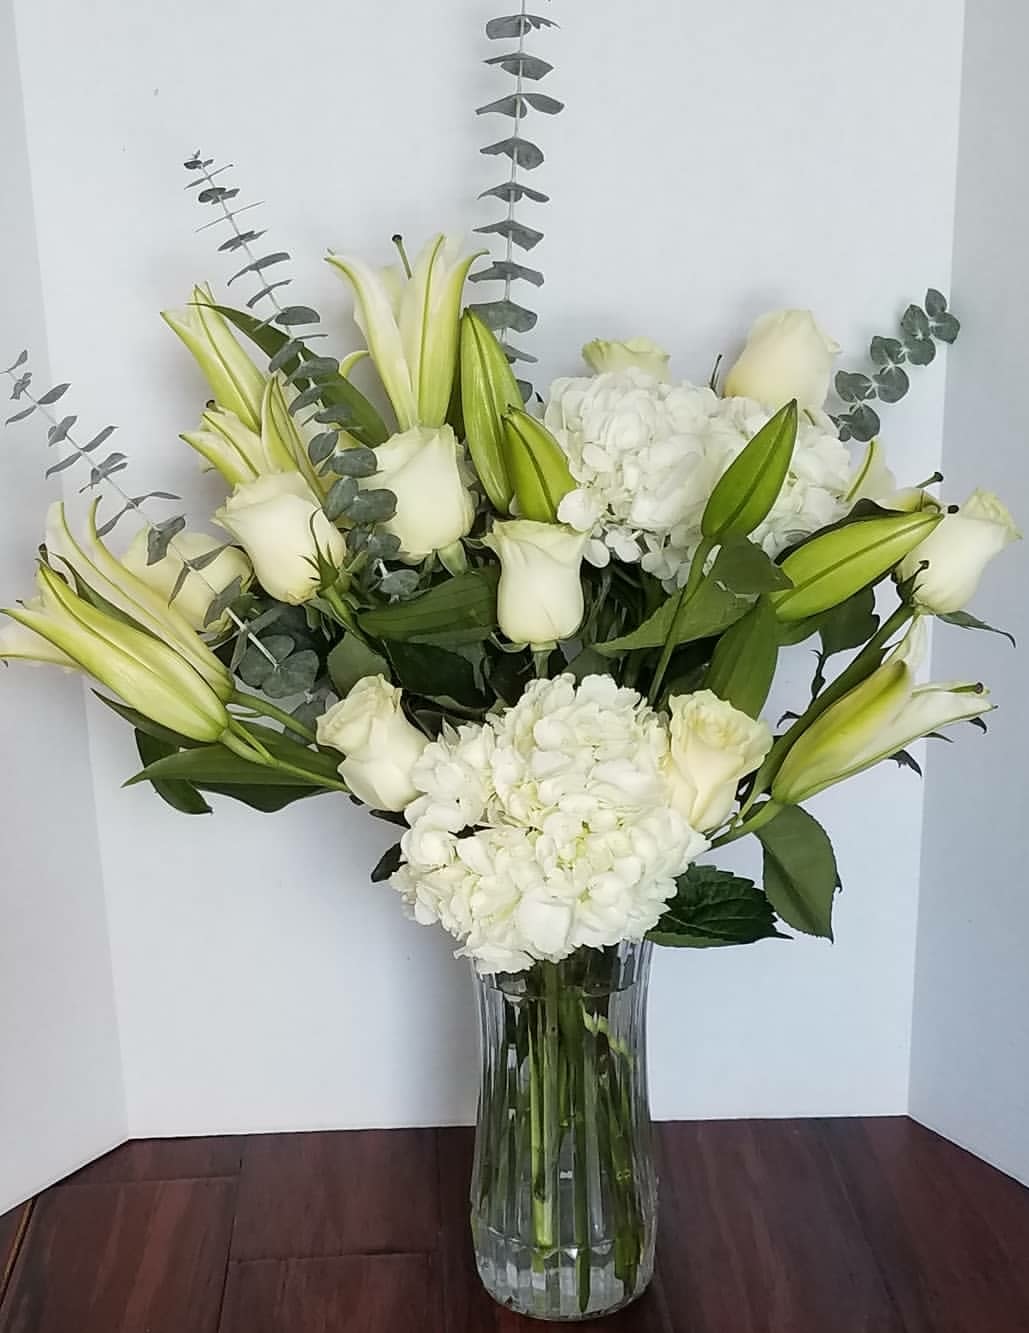 Purity Mix - Beauty of an all white mix of lovely blooms including roses, Lillies and Hydrangea 